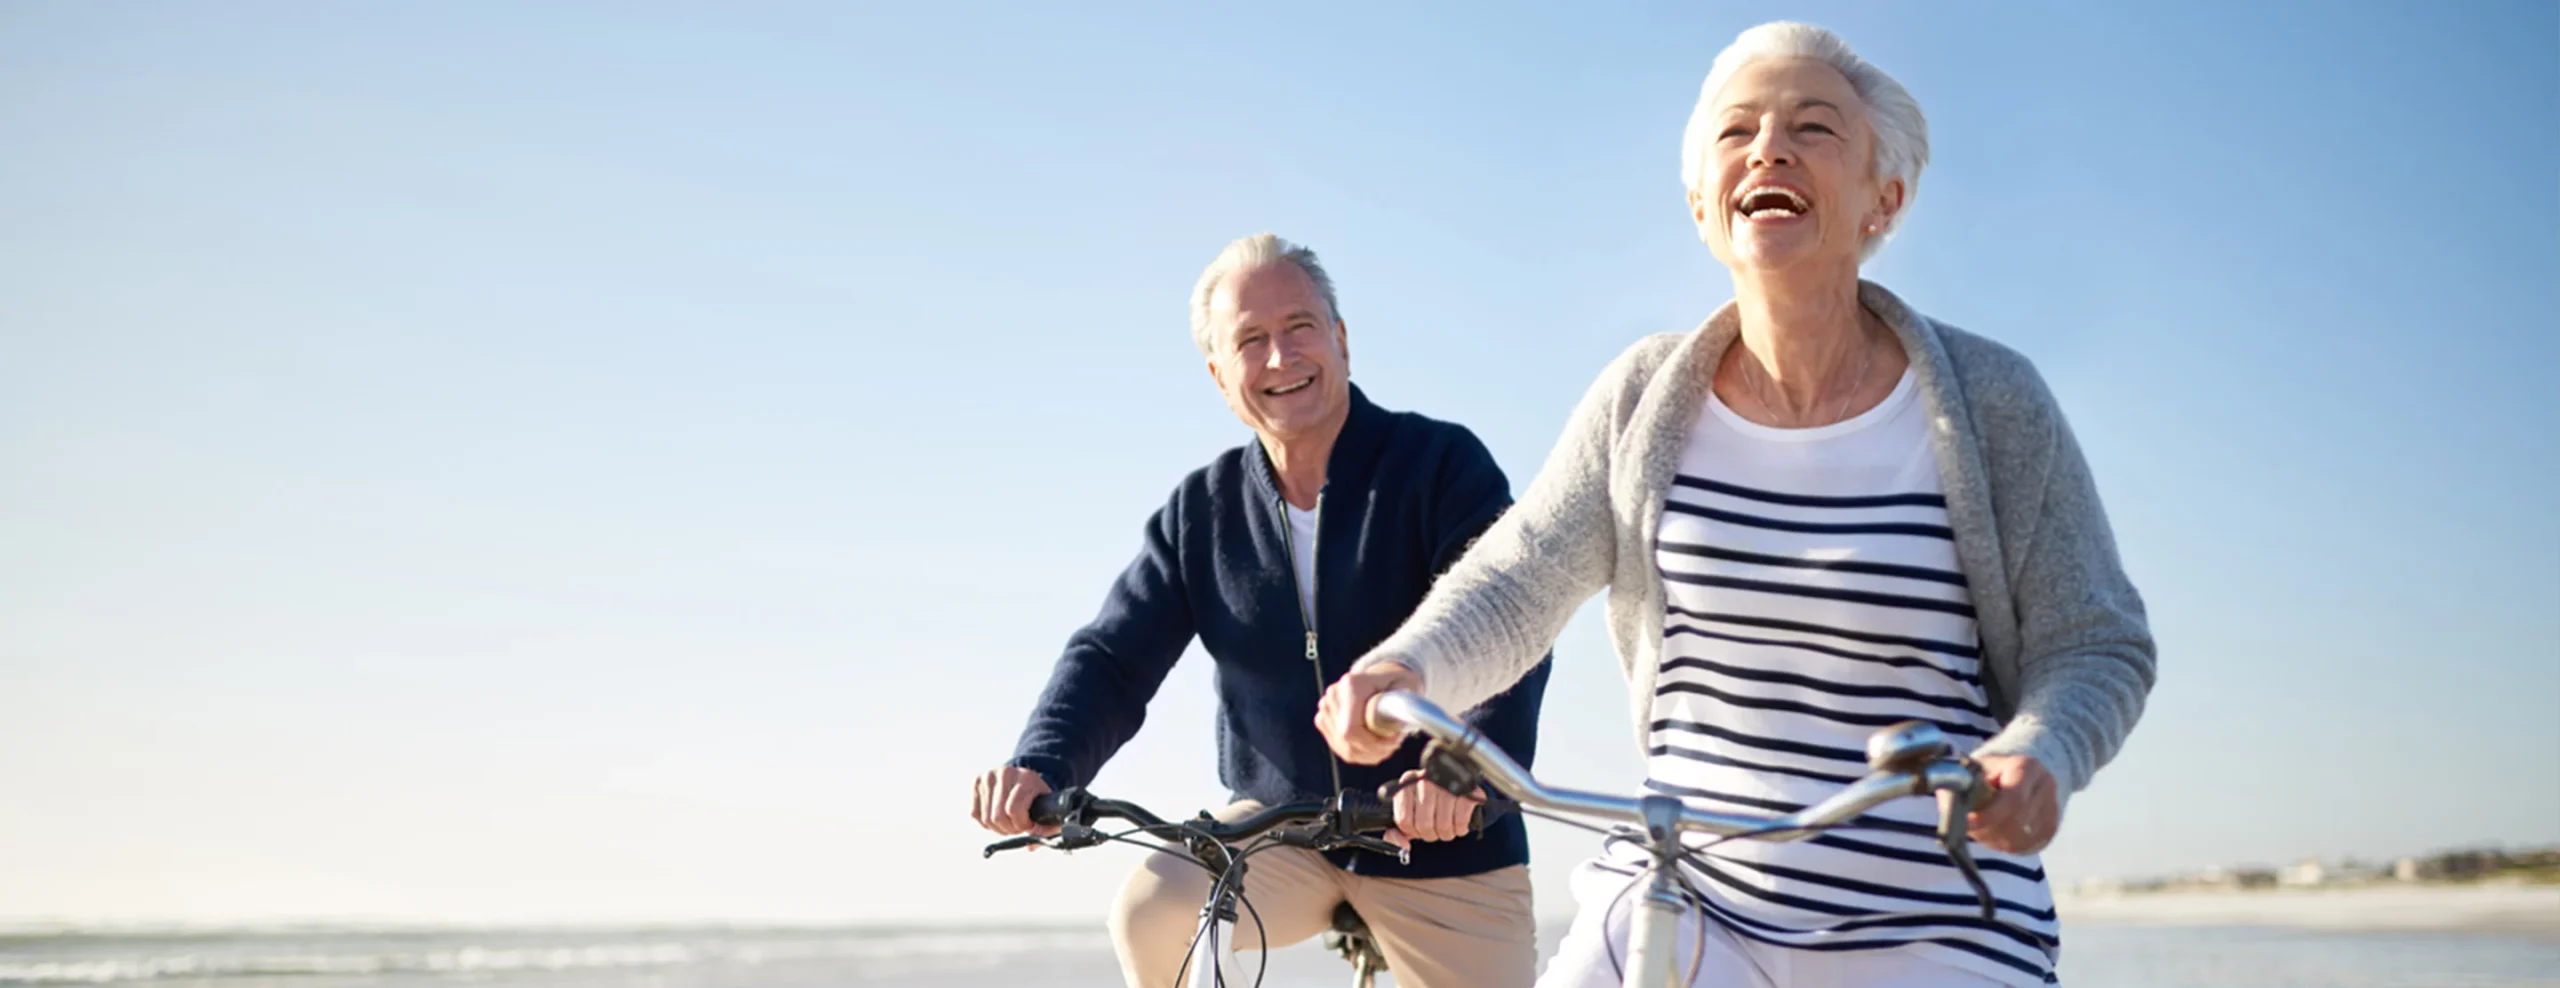 The Benefits of Physical Activity in Preventing Heart Disease